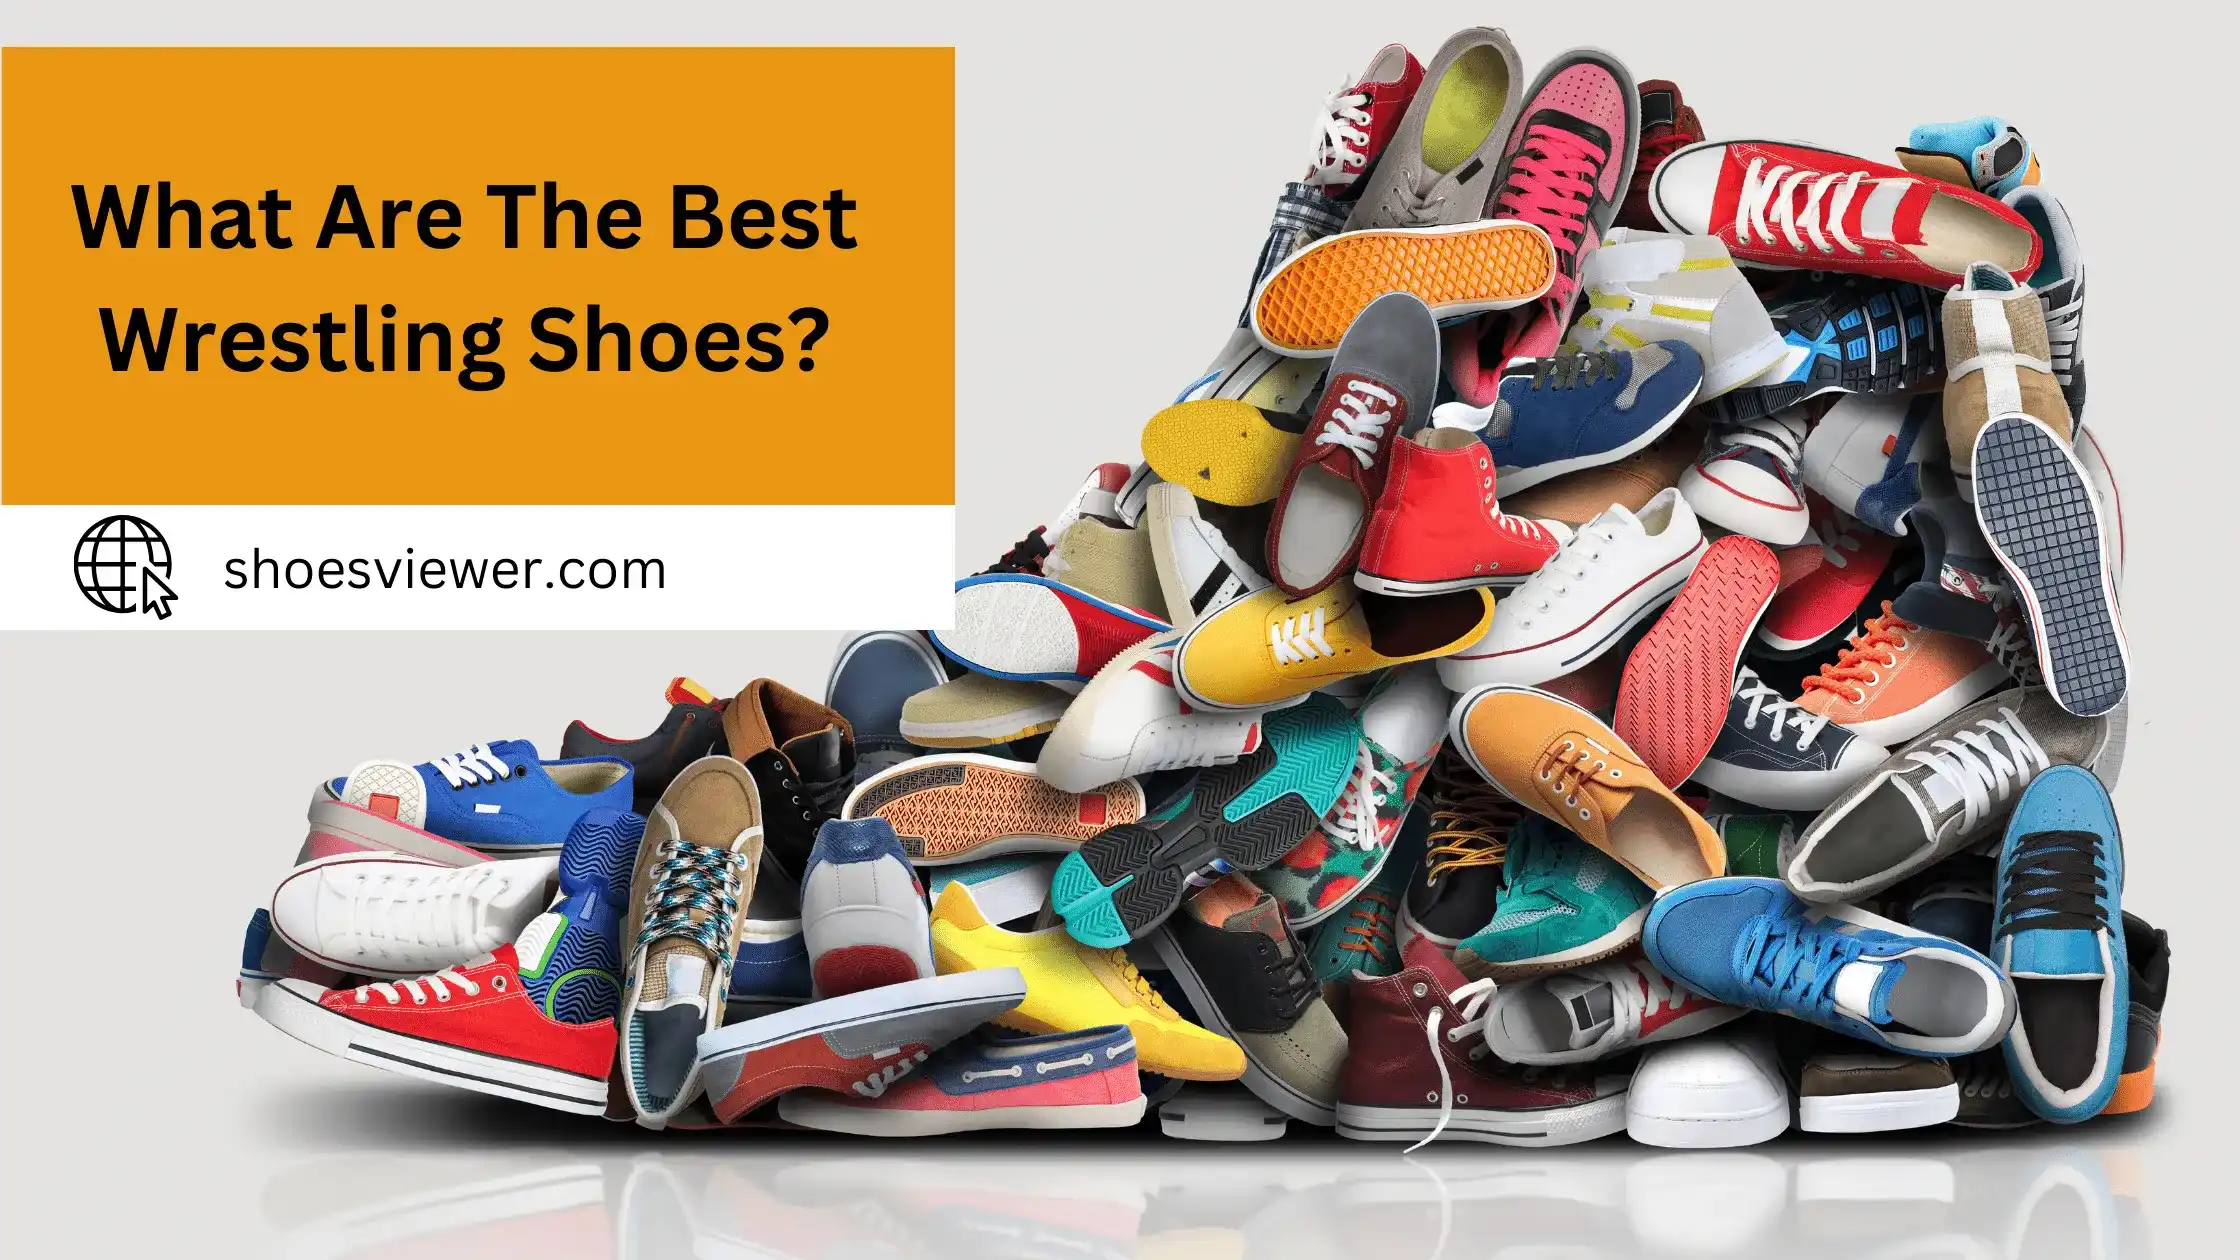 What Are The Best Wrestling Shoes? (An In-Depth Guide)